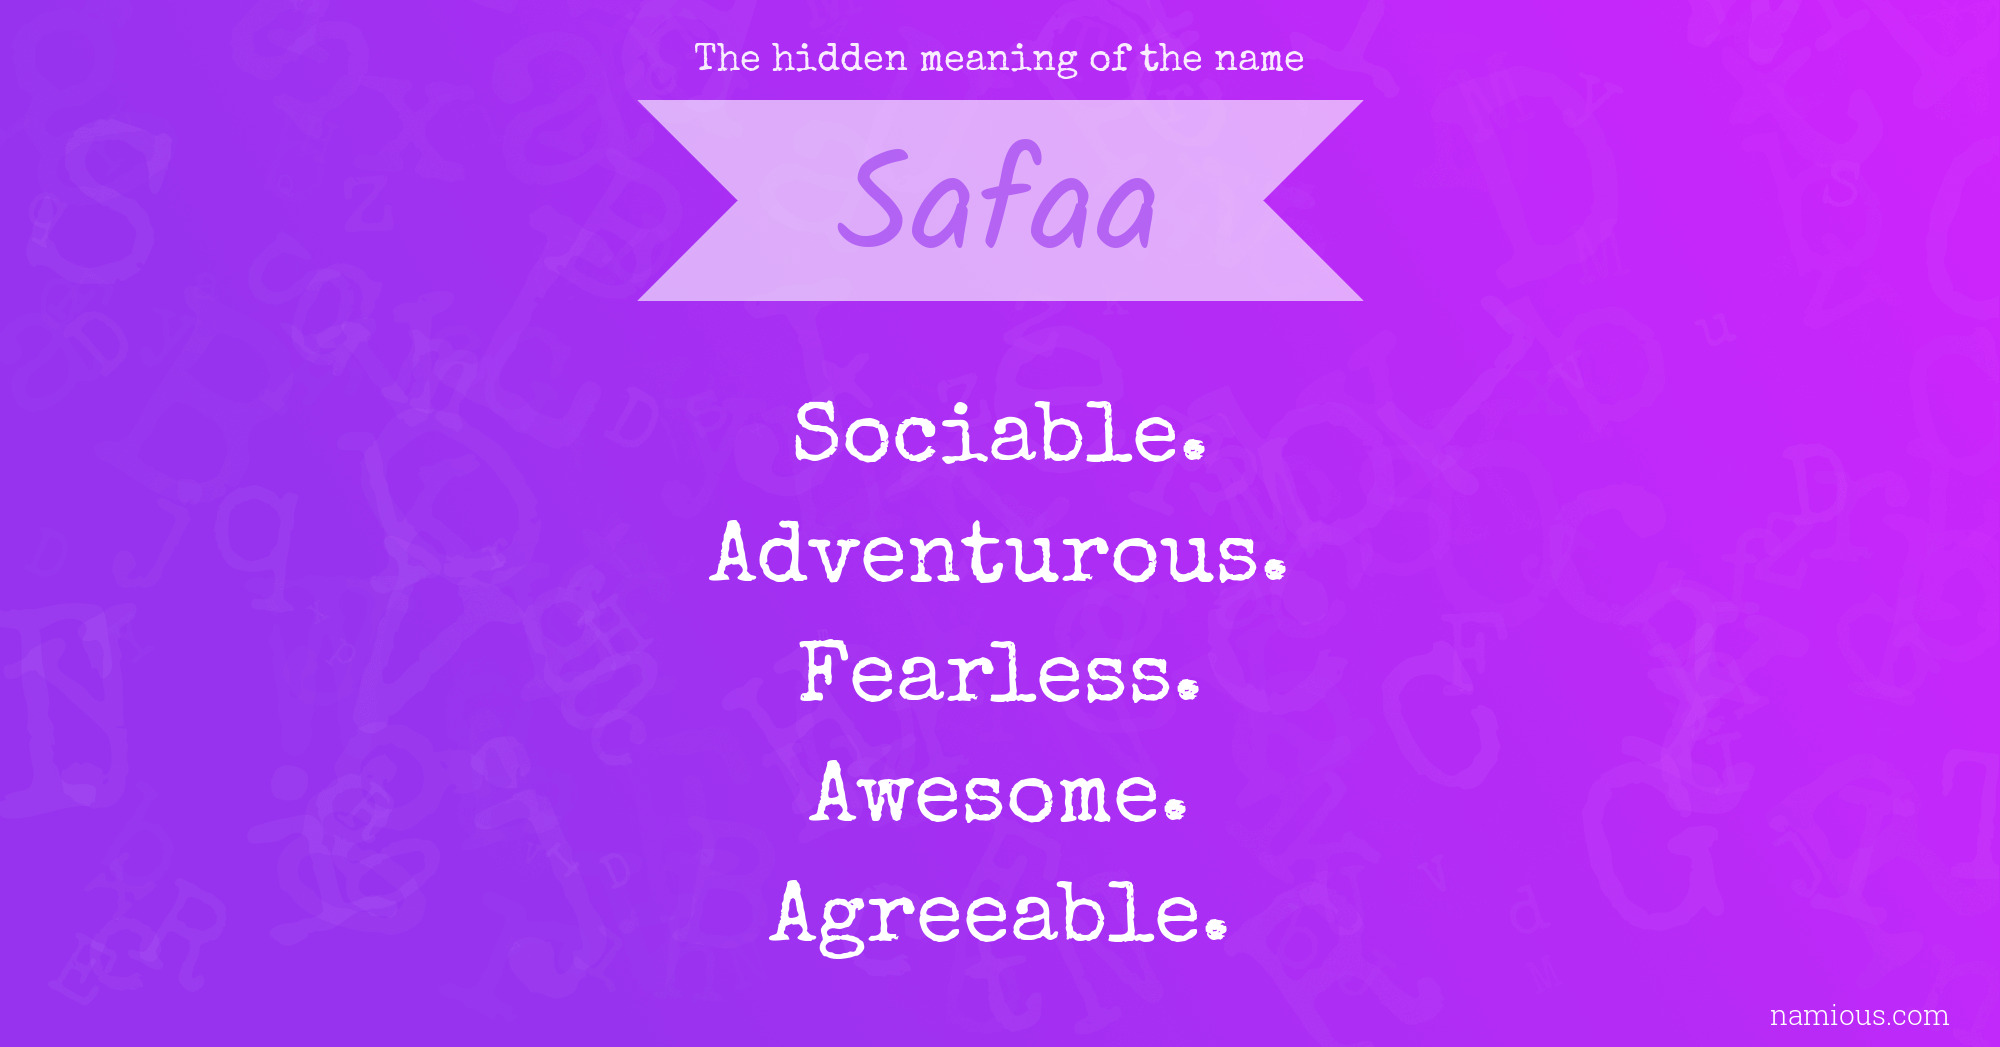 The hidden meaning of the name Safaa